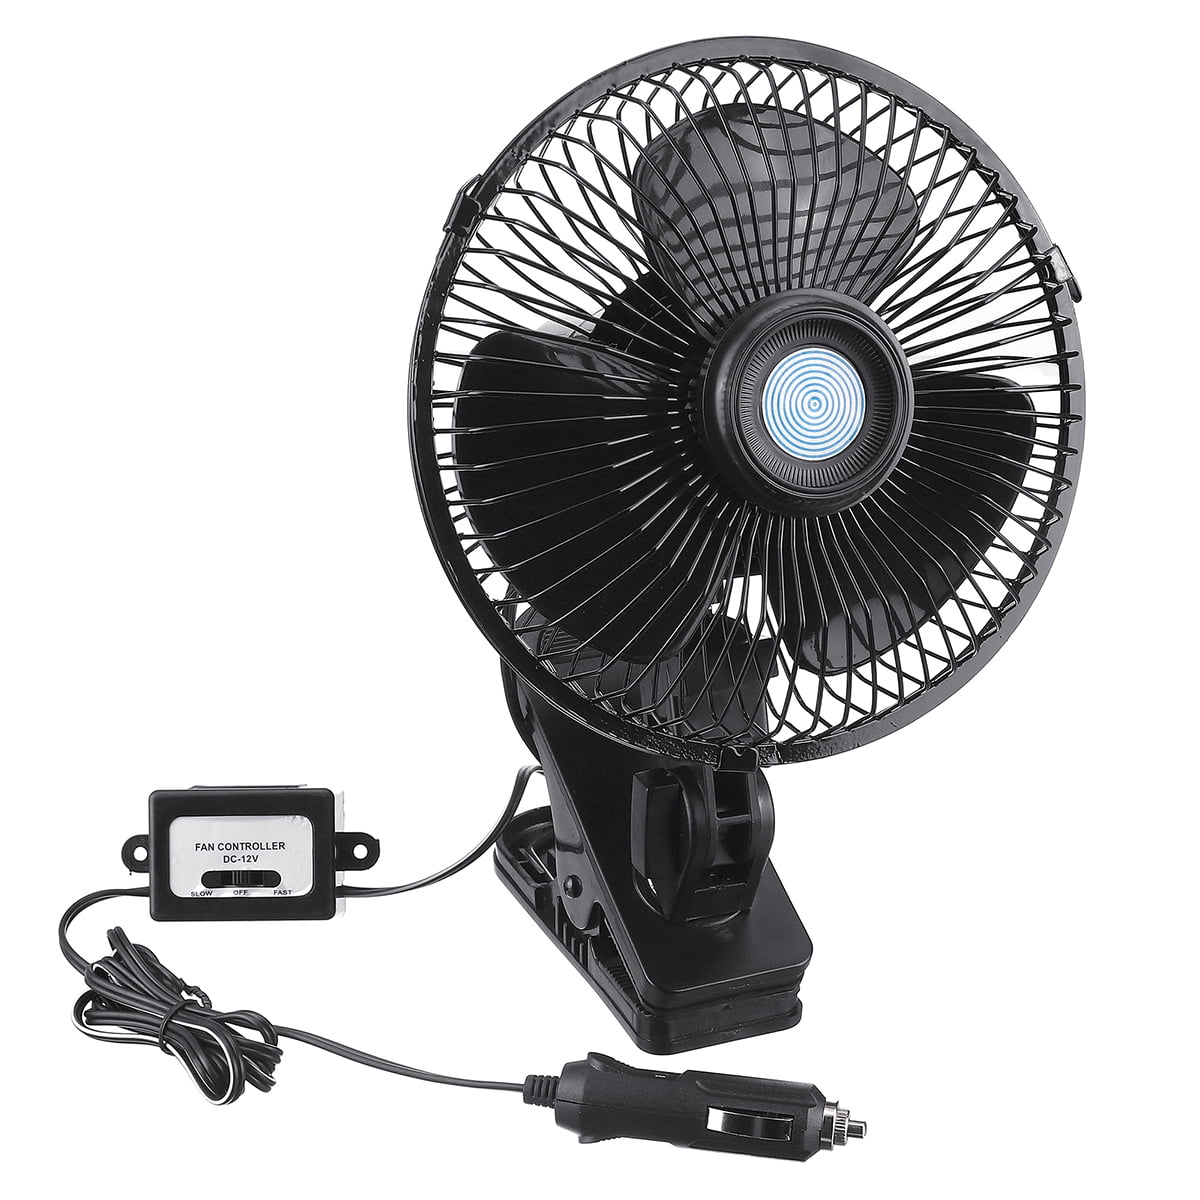 Baikewei 360 Rotating Free Adjustment Dual Head Car Auto Cooling Air Fan Powerful Quiet 3 Speed Rotatable 12V Ventilation Dashboard Electric Car Fans Summer Cooling Air Circulator Low Noise 